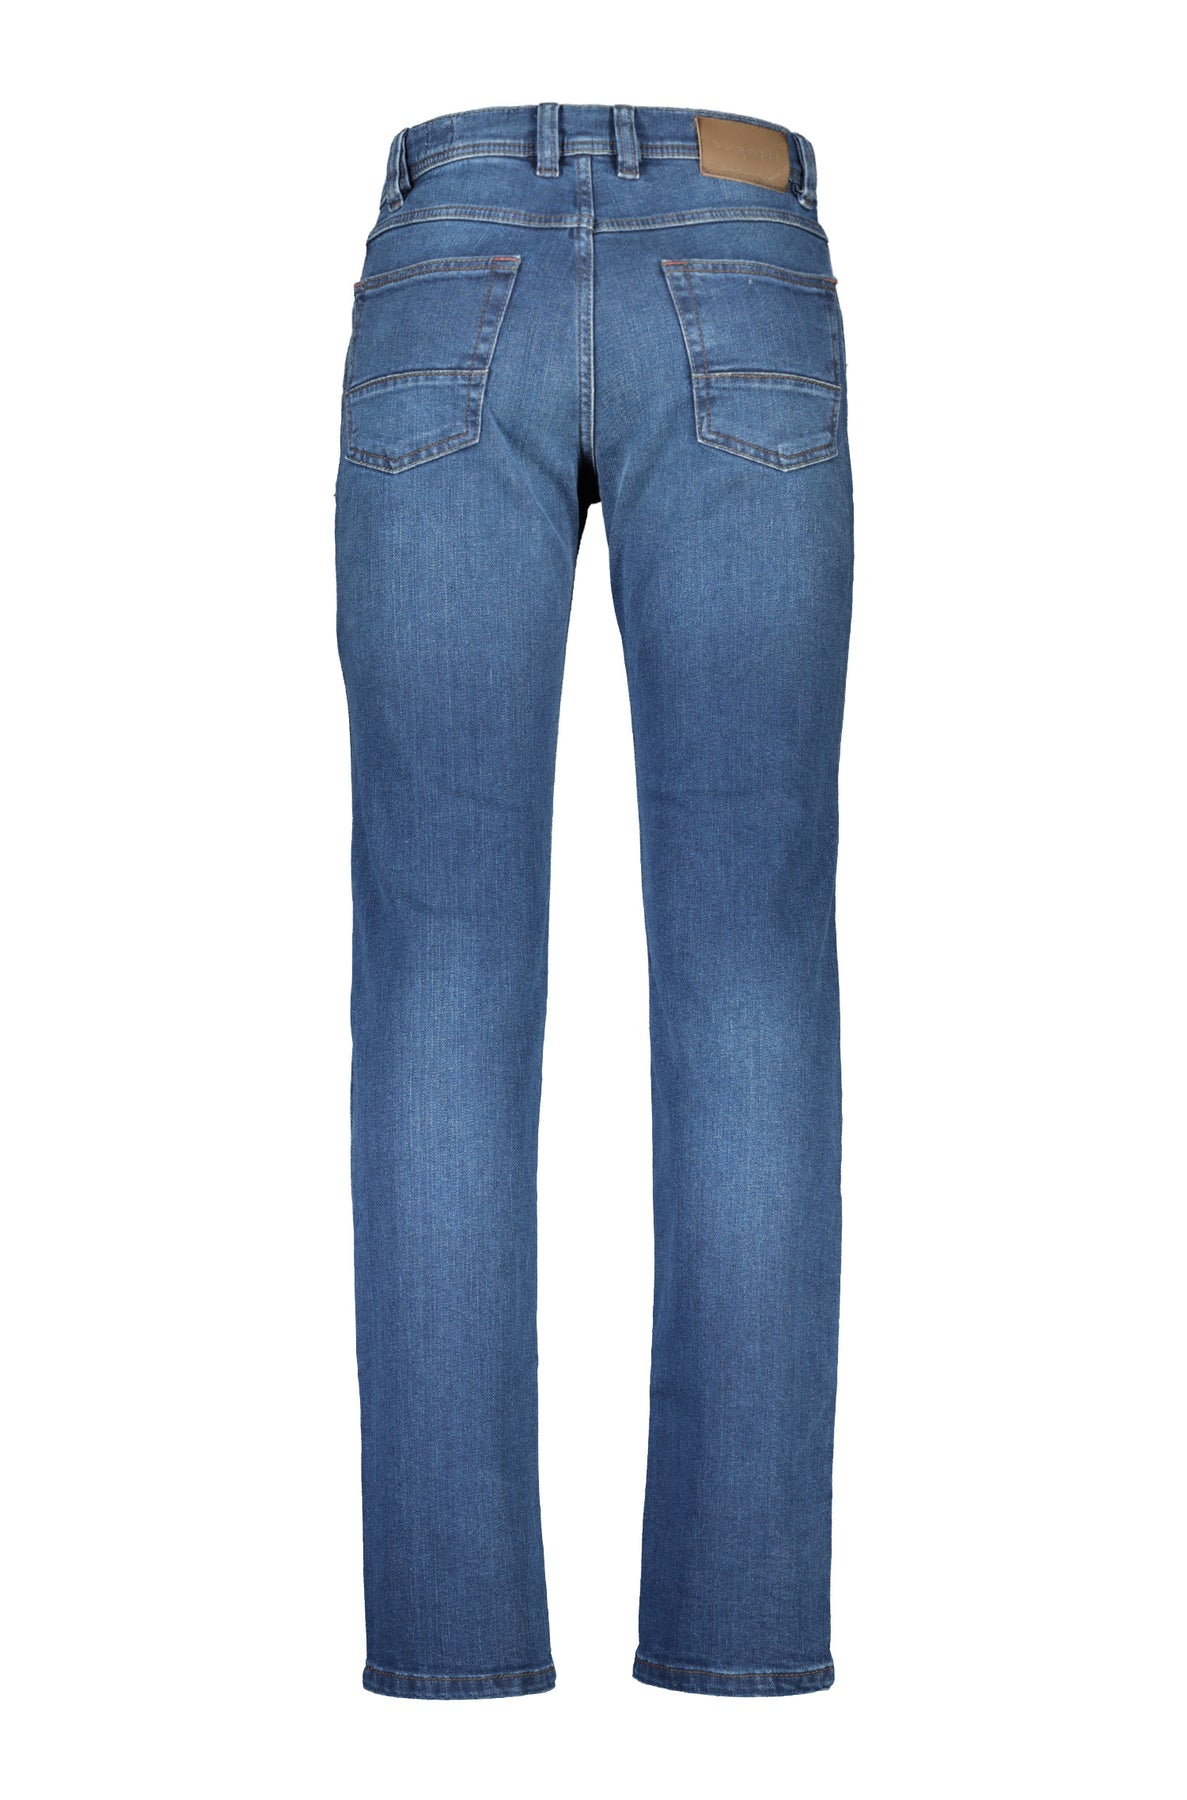 BUGATTI Regular Fit Jeans in Cotton Mix - 3280D 16641 from Concorde Fashion